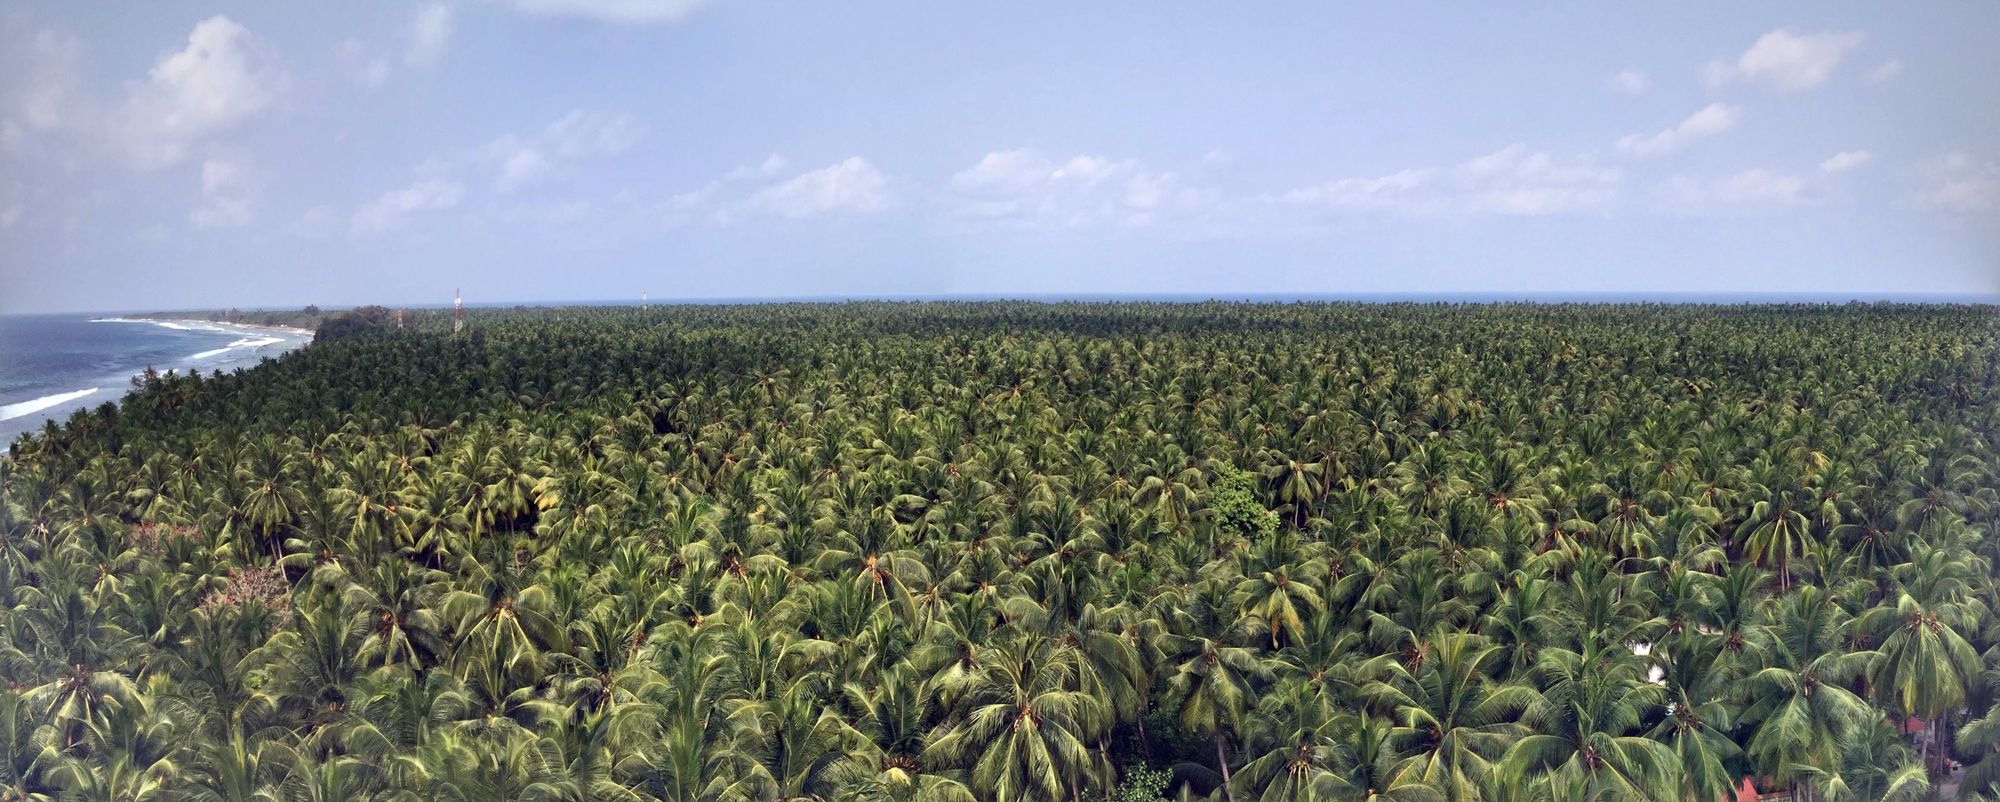 Coconut Trees On An Island by ClickingHappiness | www.shutterstock.com